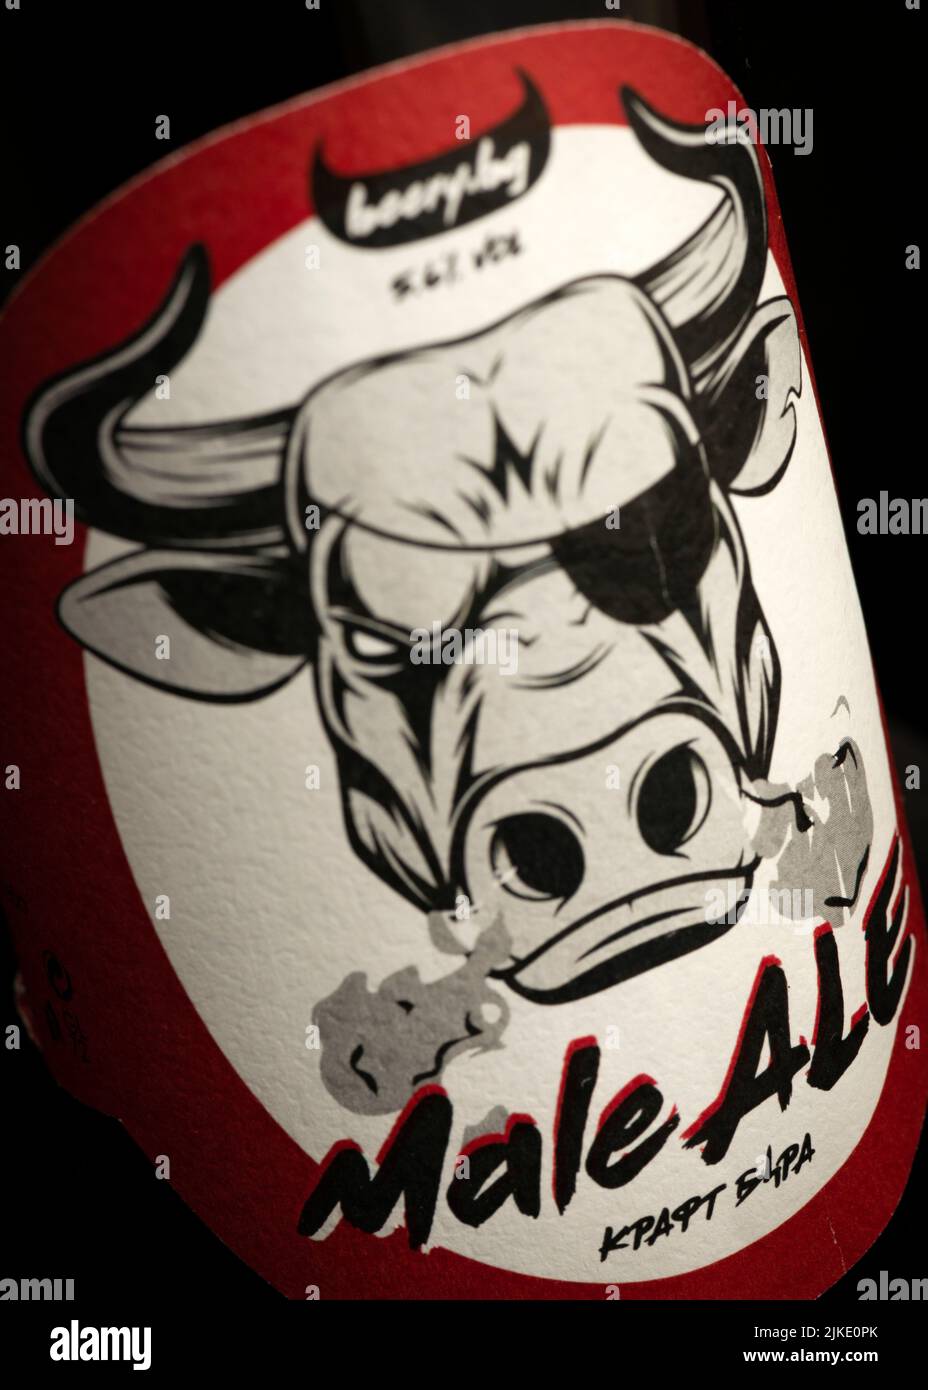 Male Ale Bulgarian craft beer bottle label close up detail Stock Photo